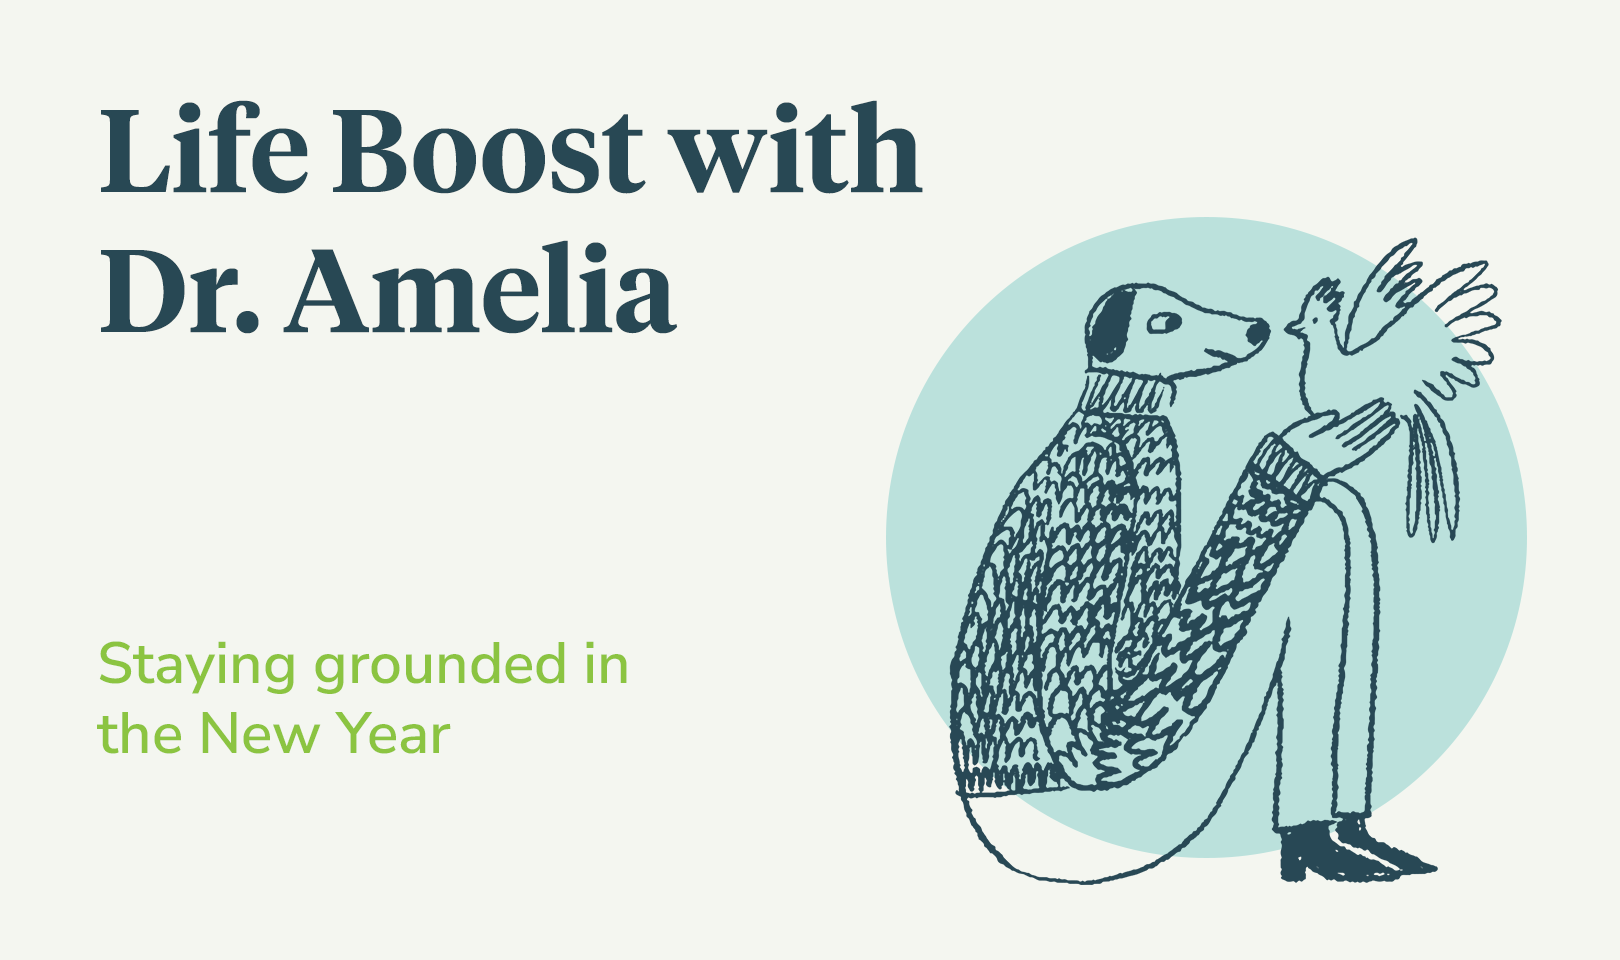 The text "Life Boost with Dr. Amelia: Staying grounded in the New Year" beside an image of an anthropomorphic dog sitting on the ground and holding a bird.